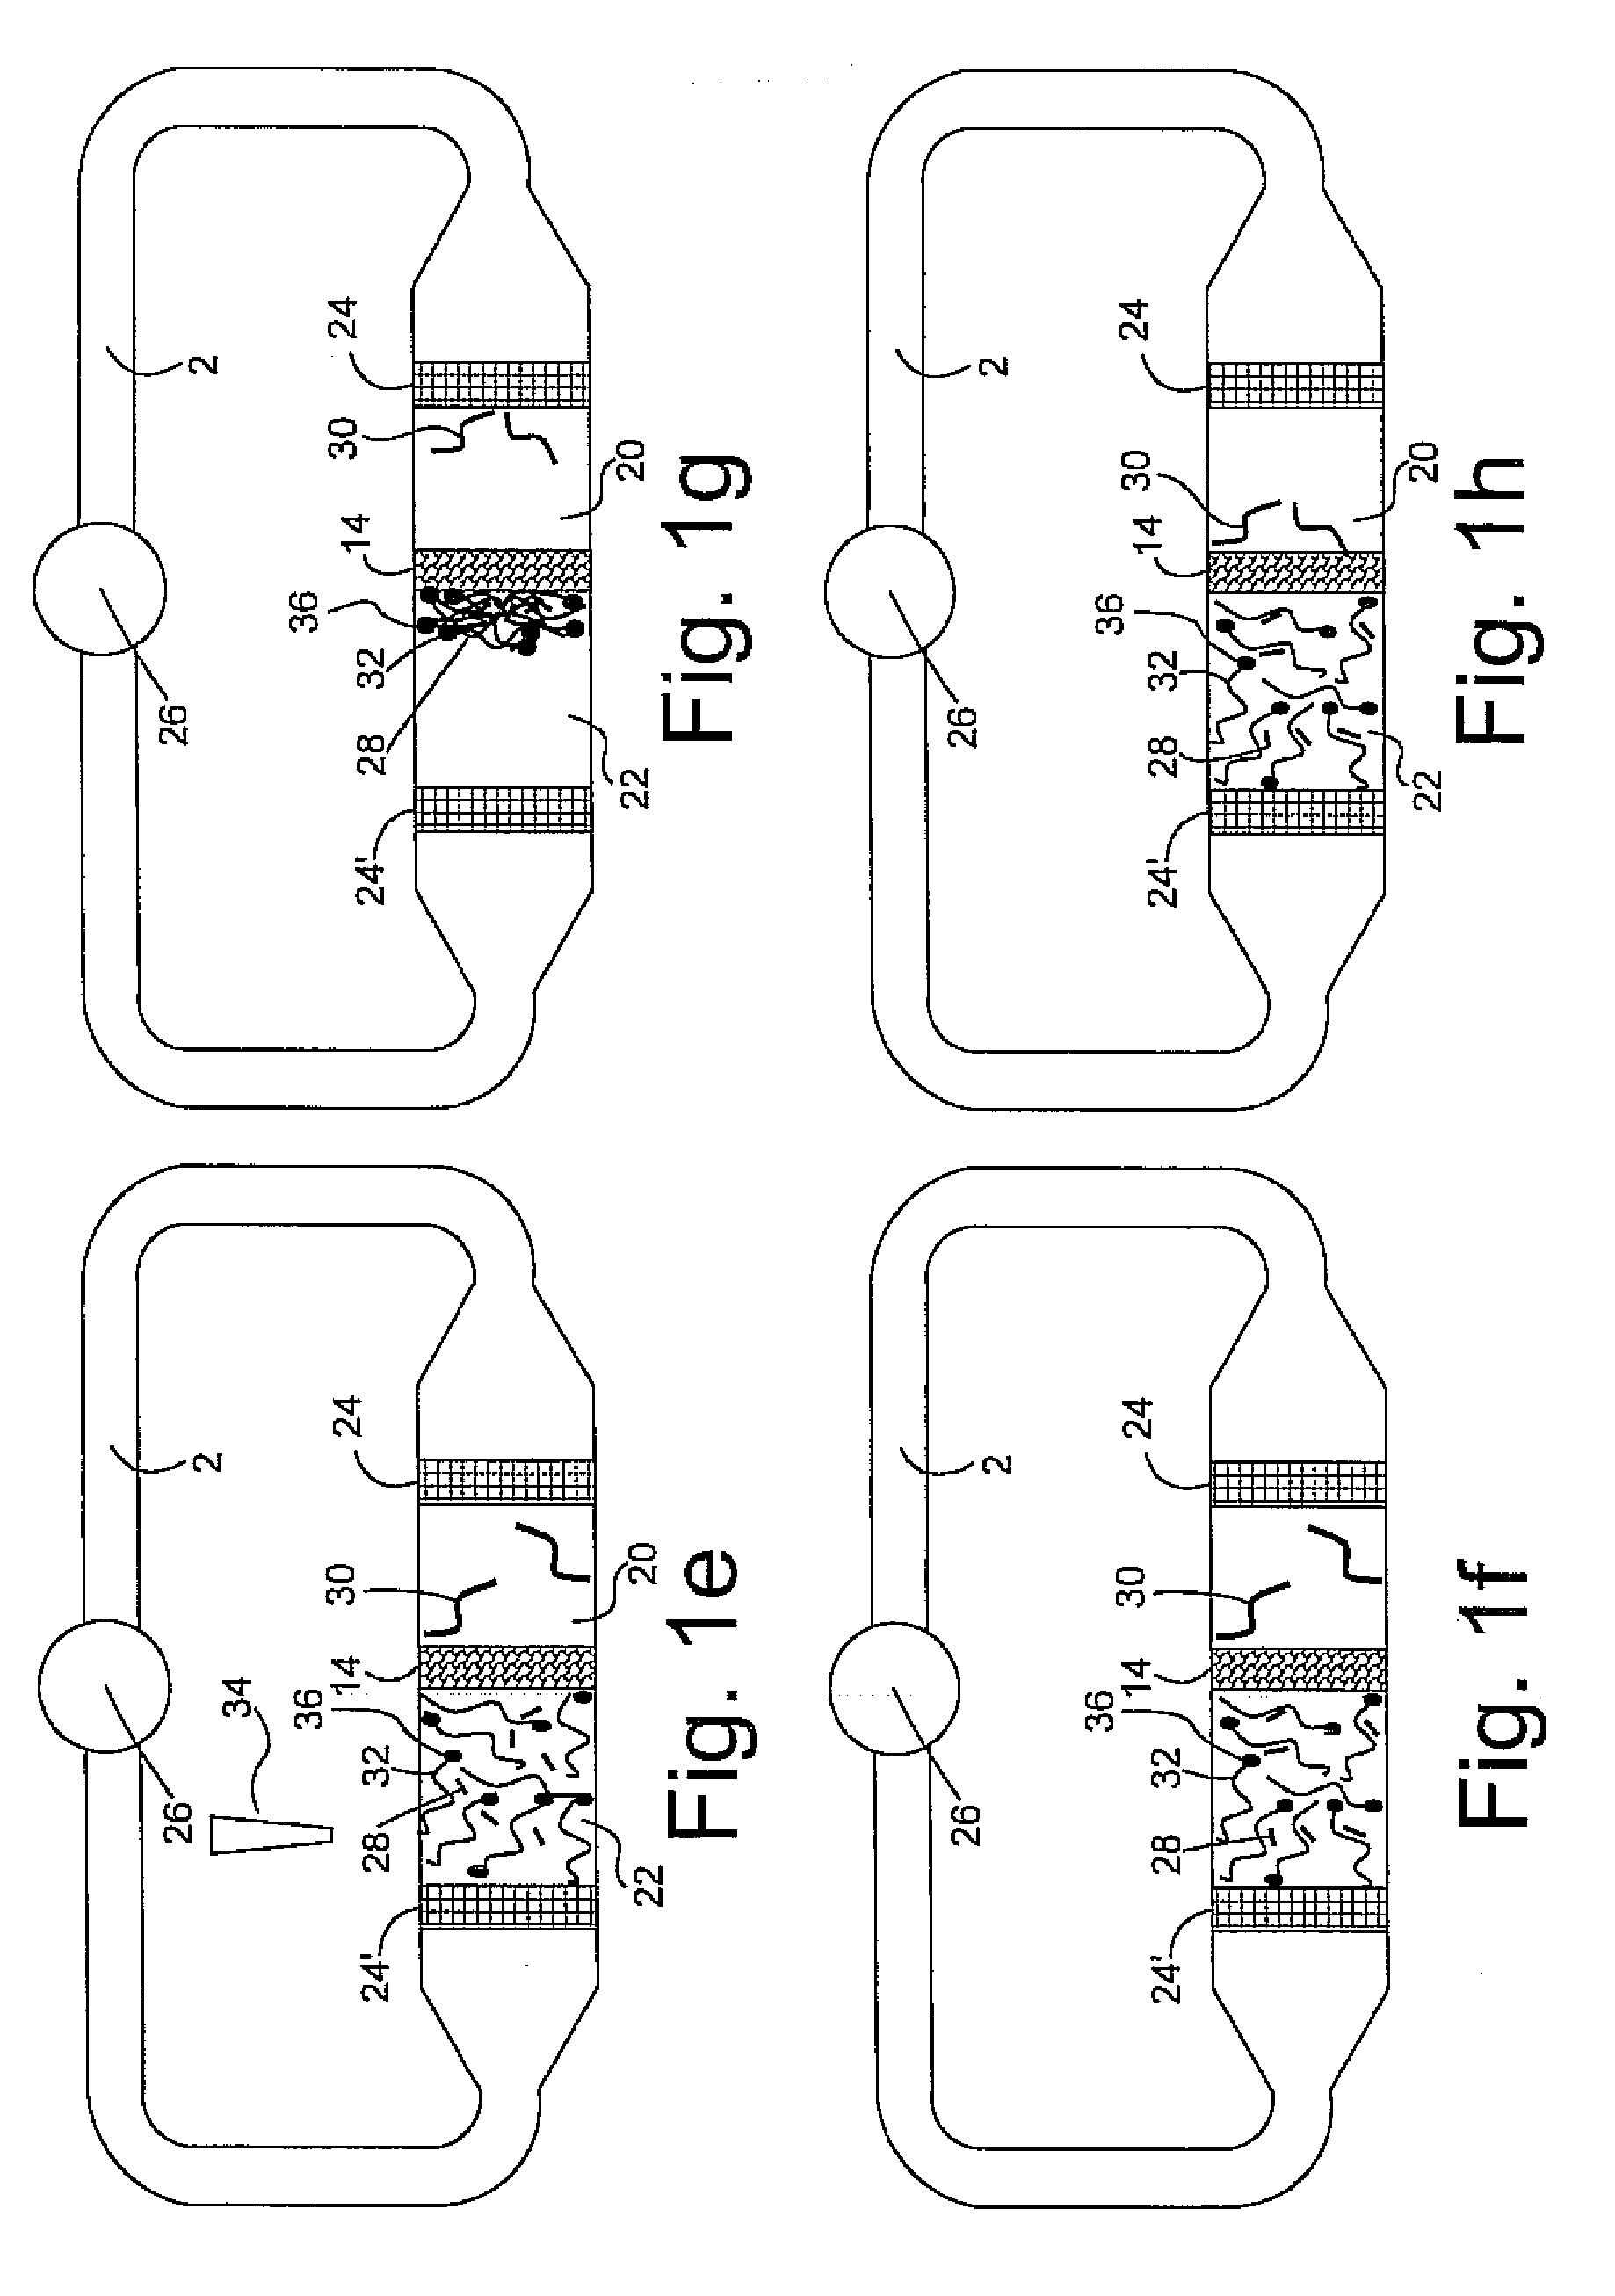 Nucleic acid array with releaseable nucleic acid probes